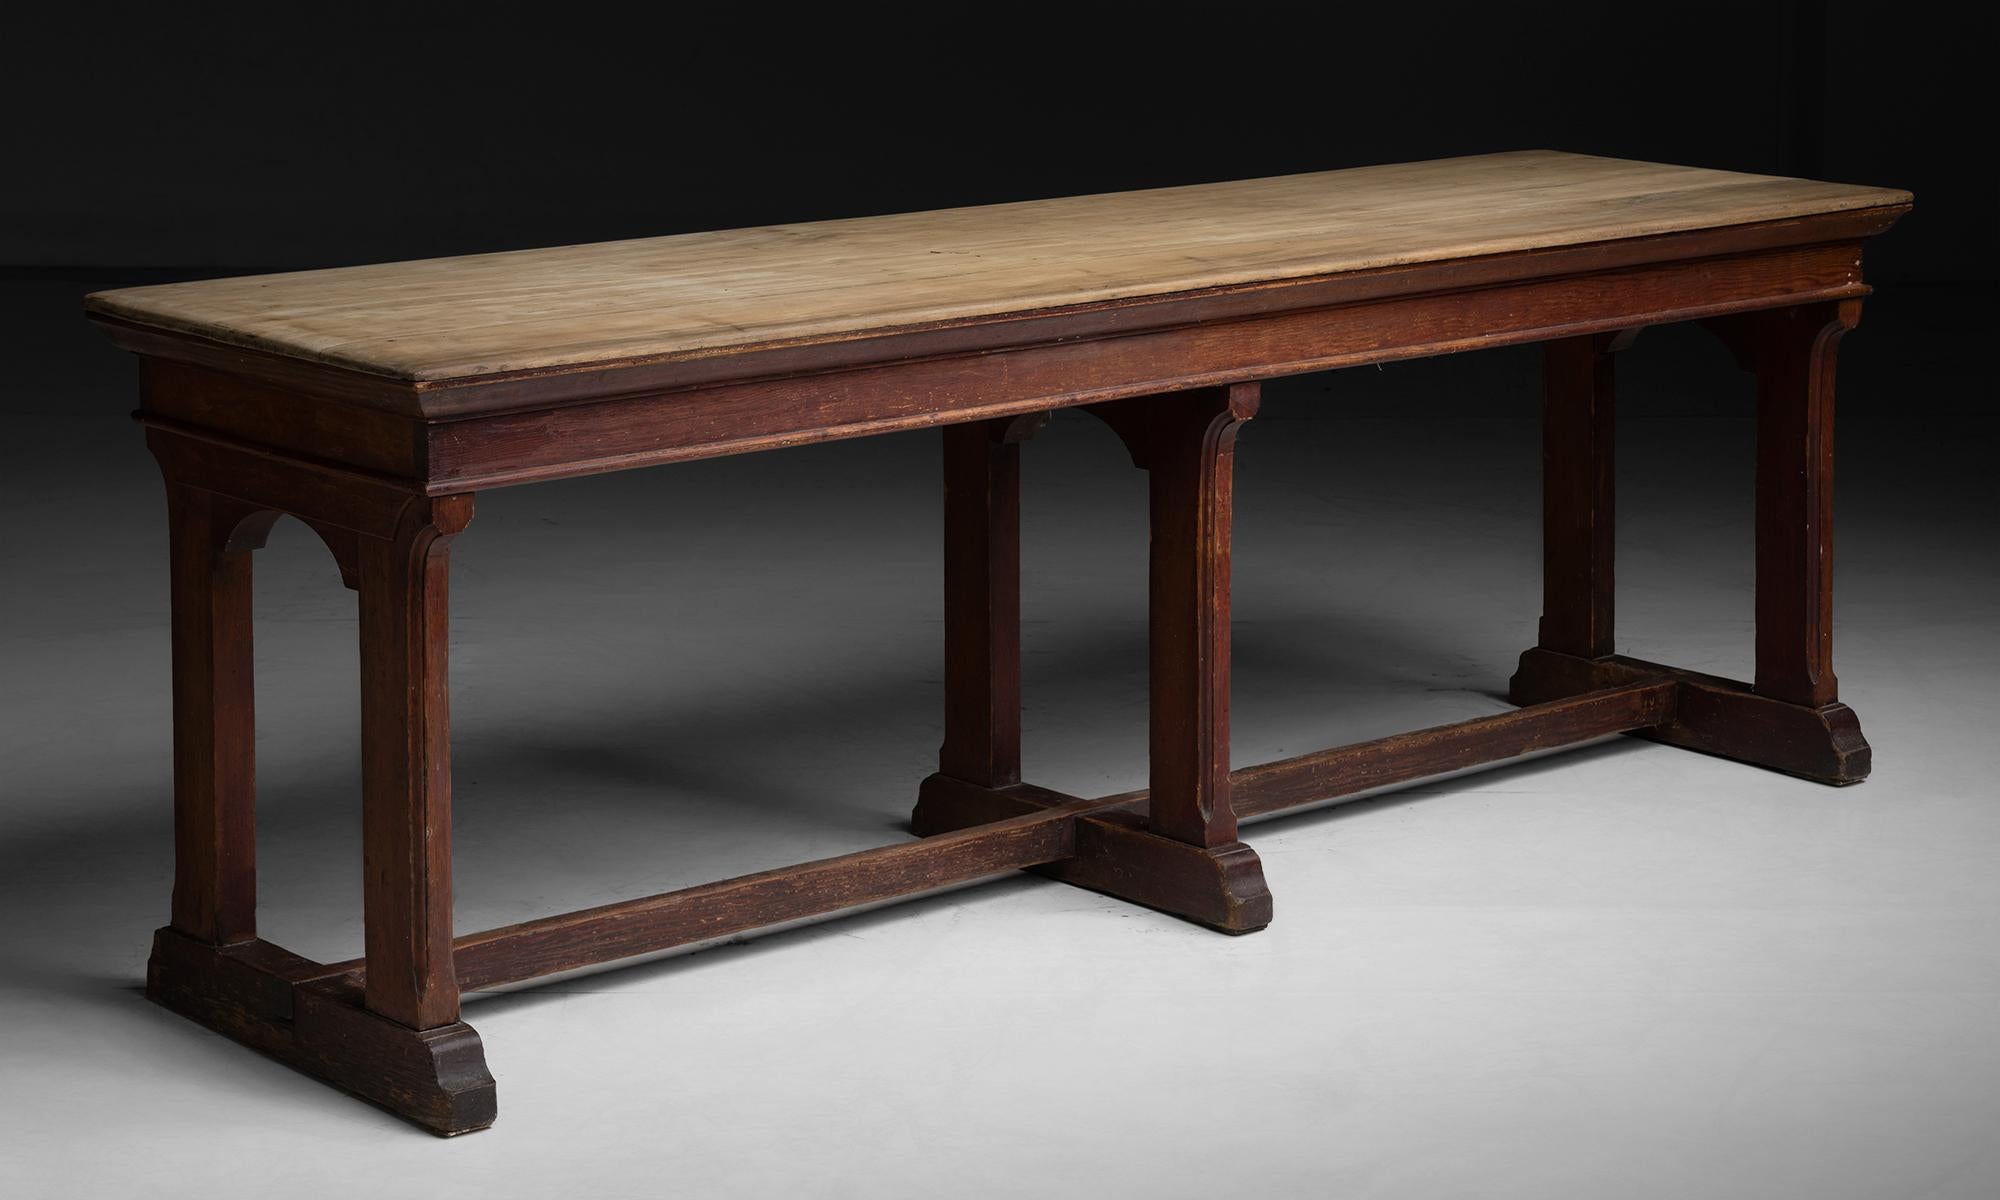 Console / Serving Table

England circa 1890

Wooden console with scrubbed top and original stain to base.

88.25”L x 25.5”d x 29.75”h